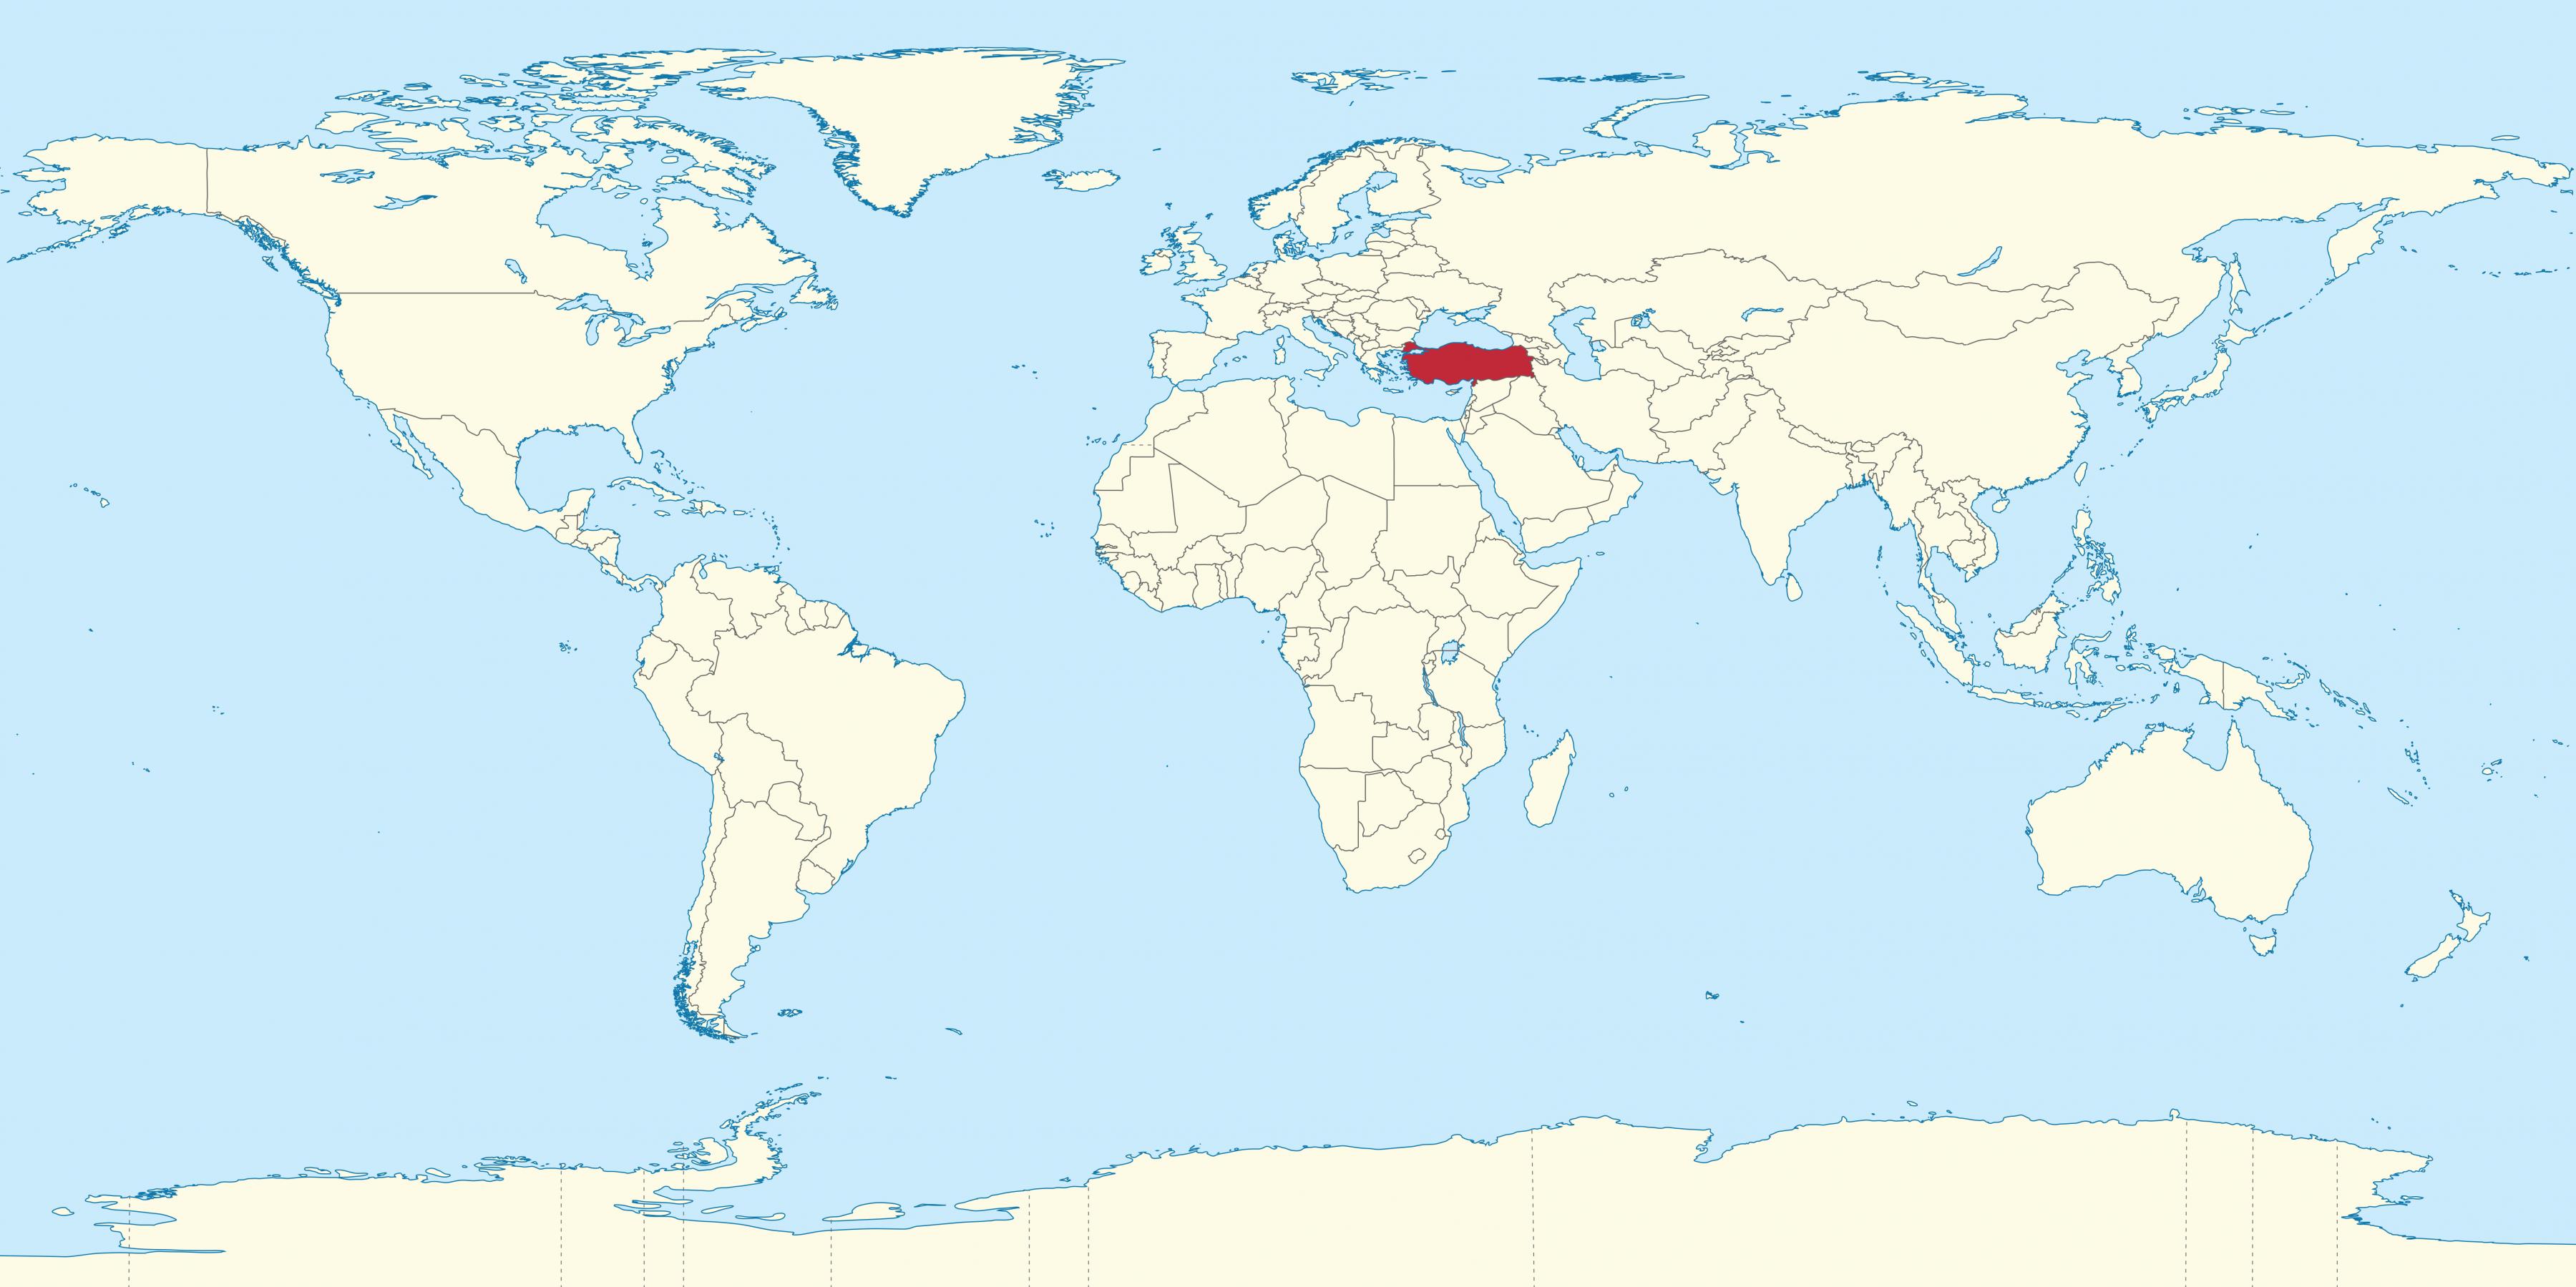 Turkey on world map: surrounding countries and location on Asia map